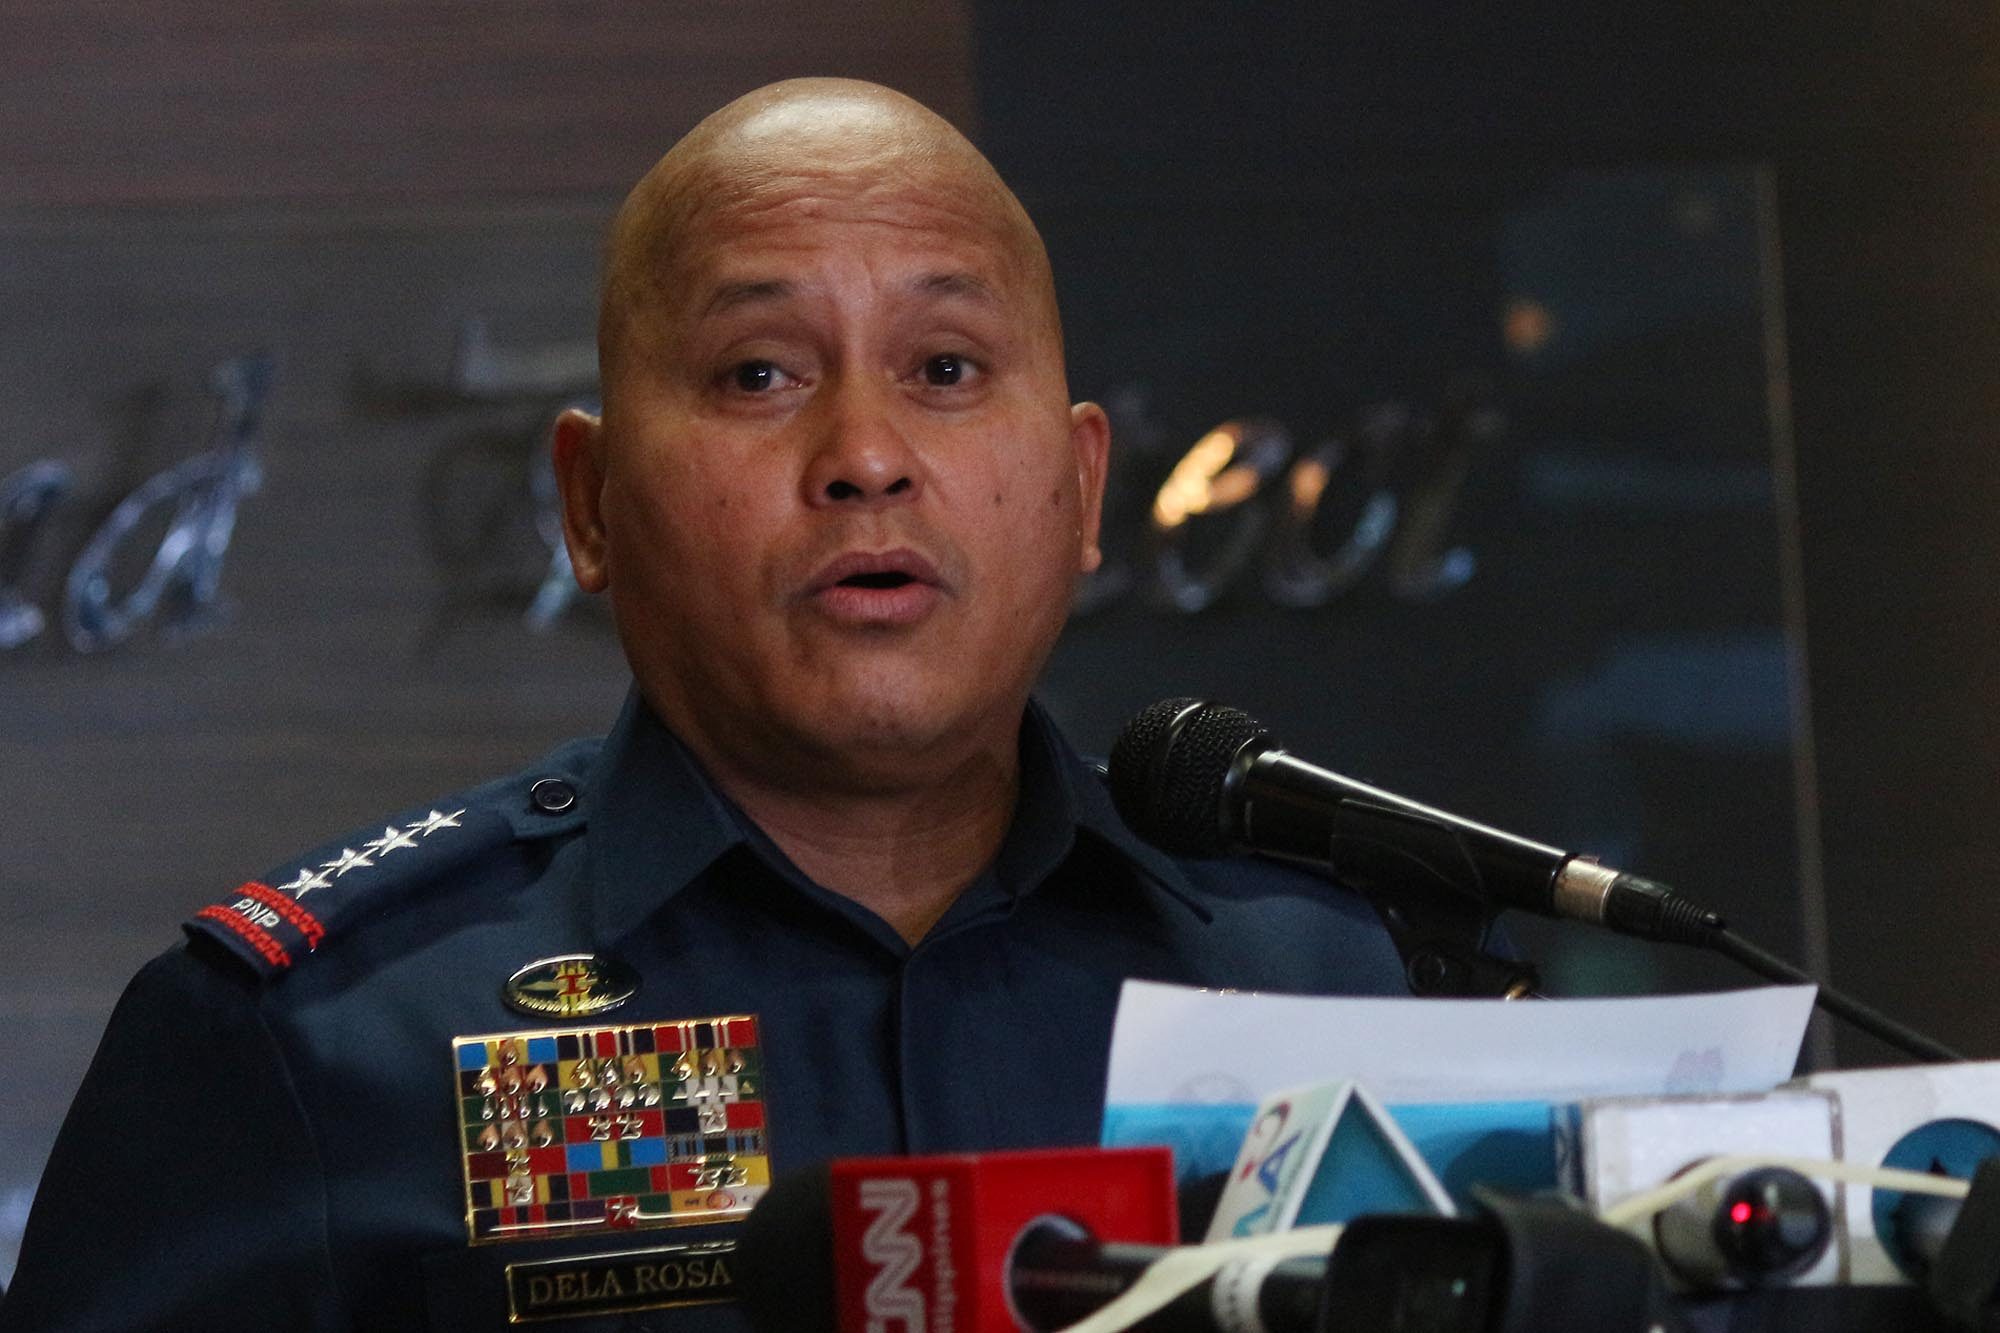 PNP confirms reports of ‘threats’ in Central Visayas